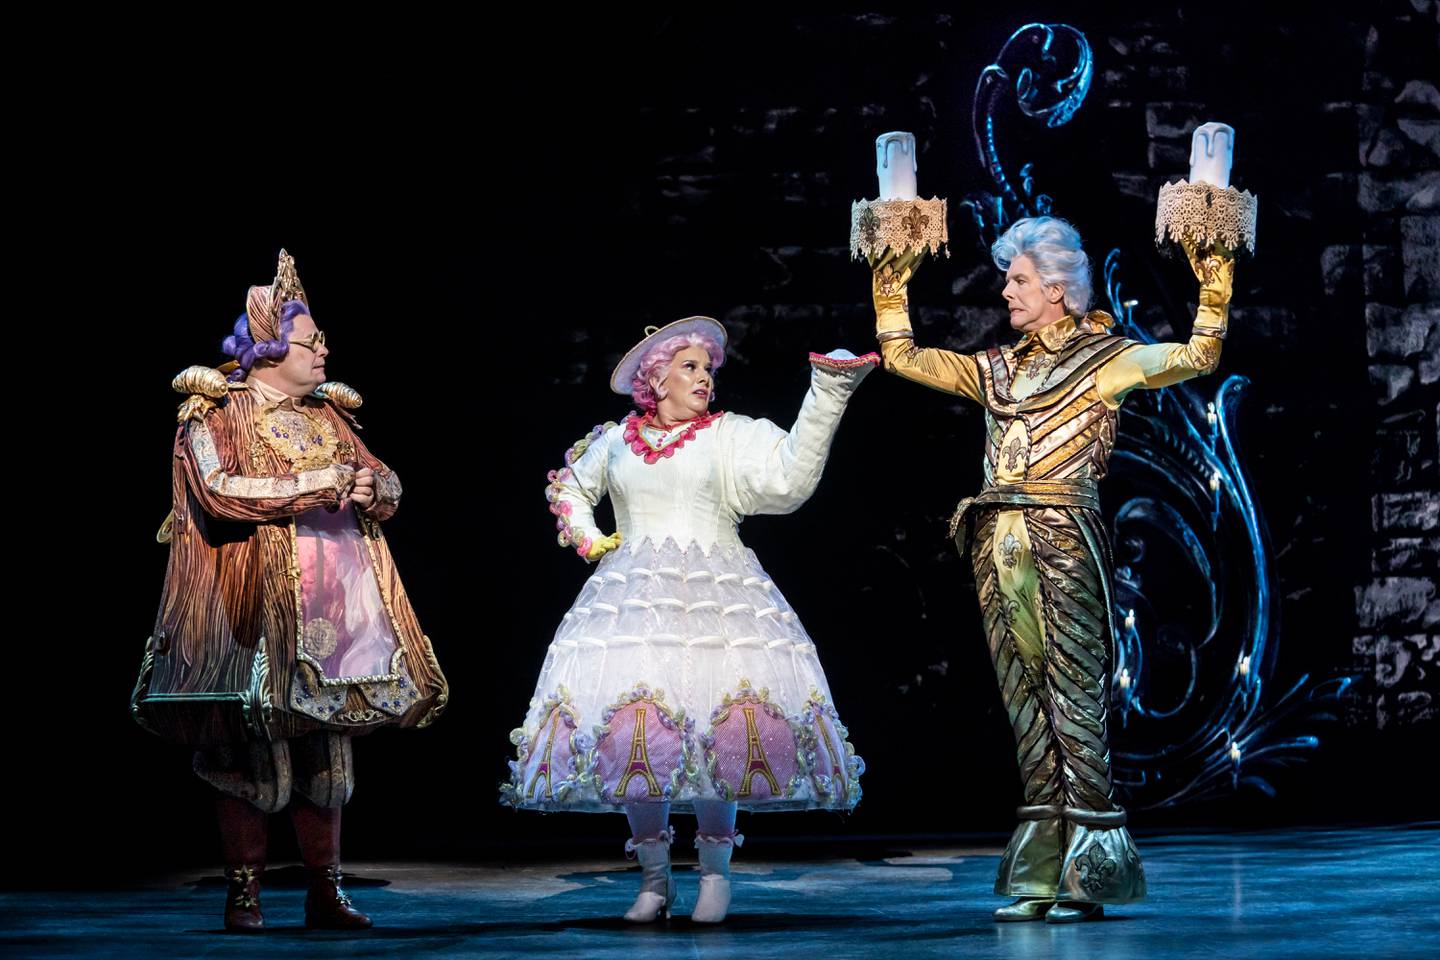 Image taken from the musical show Beauty and the Beast